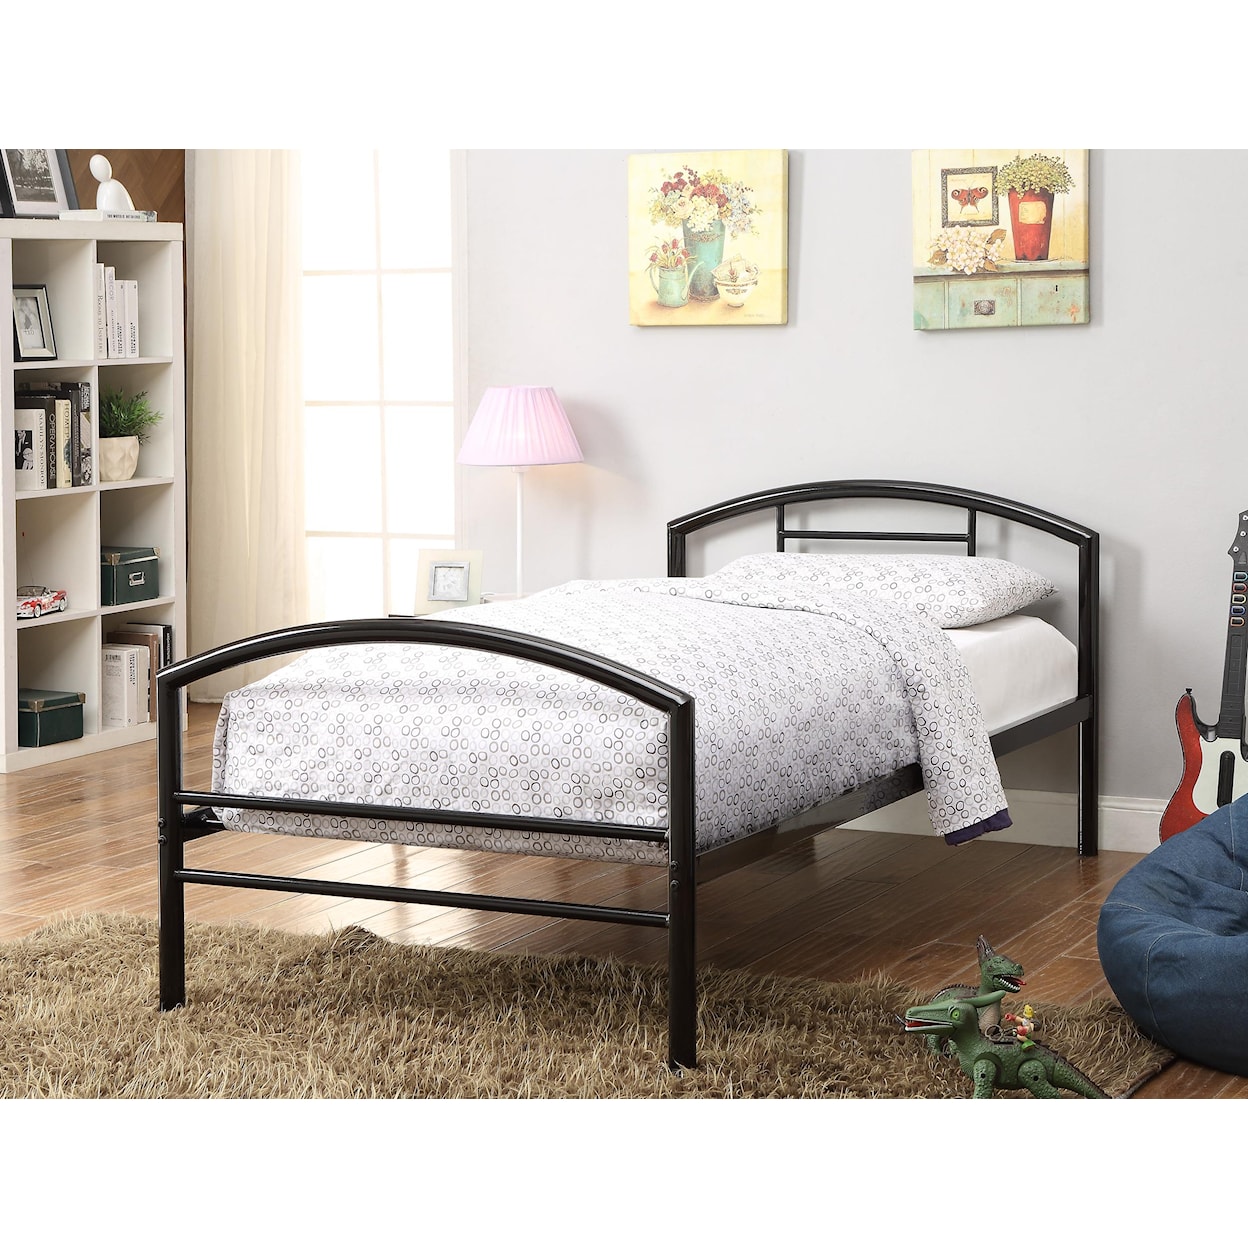 Coaster Iron Beds and Headboards Twin Bed